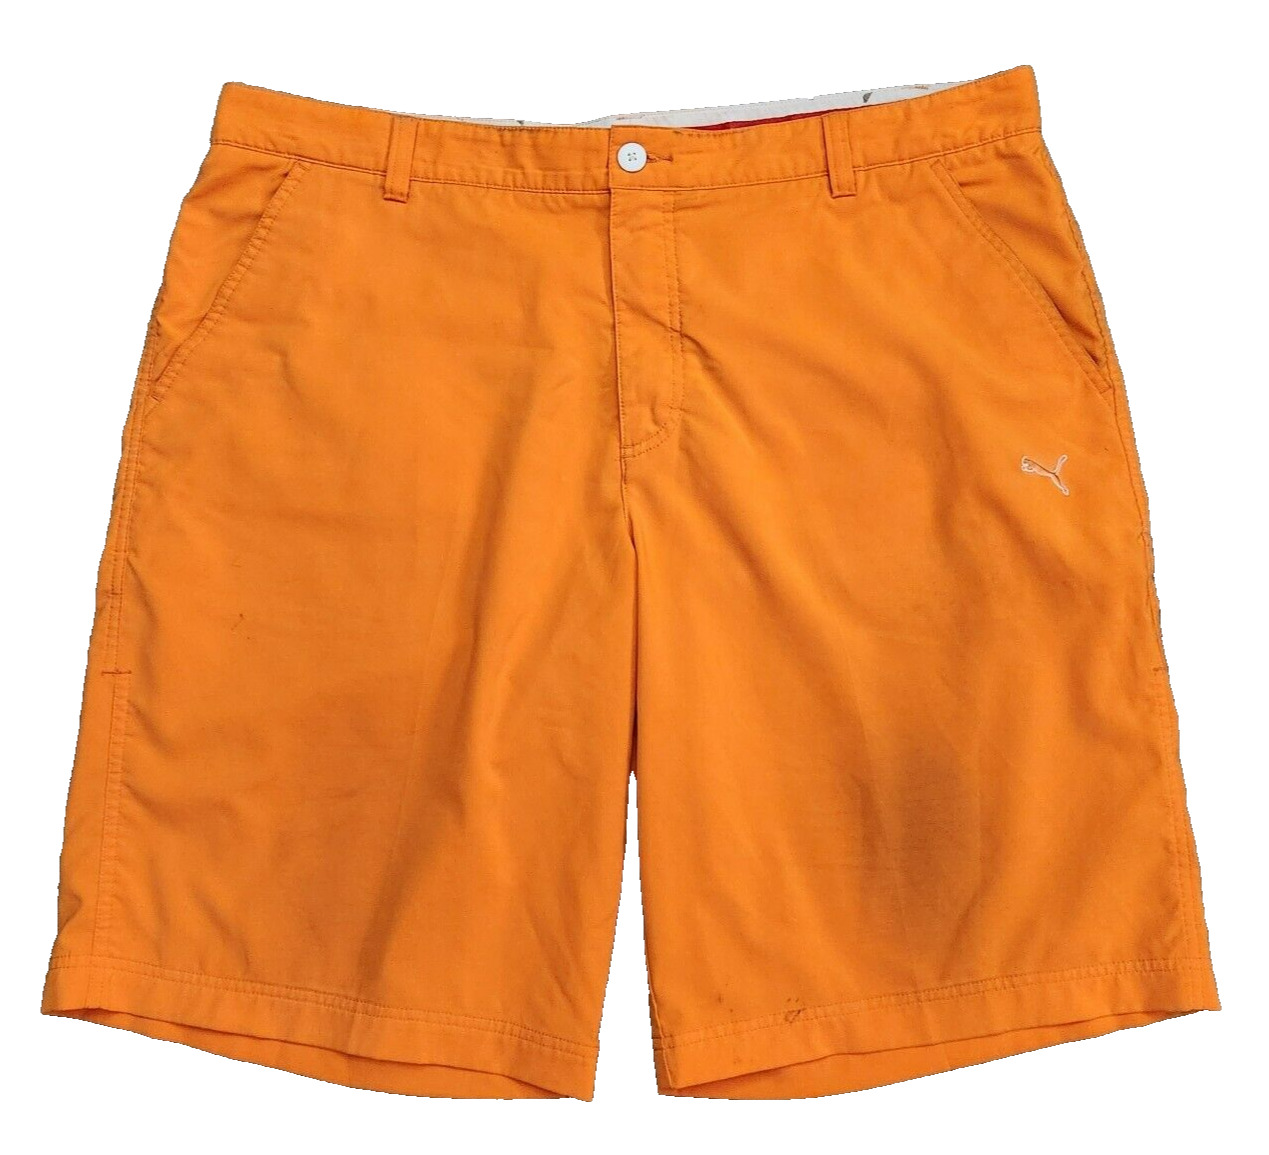 Puma Dry Cell Golf Chino Shorts Men’s Size 40 Orange Stretch Flat Front Rn62200